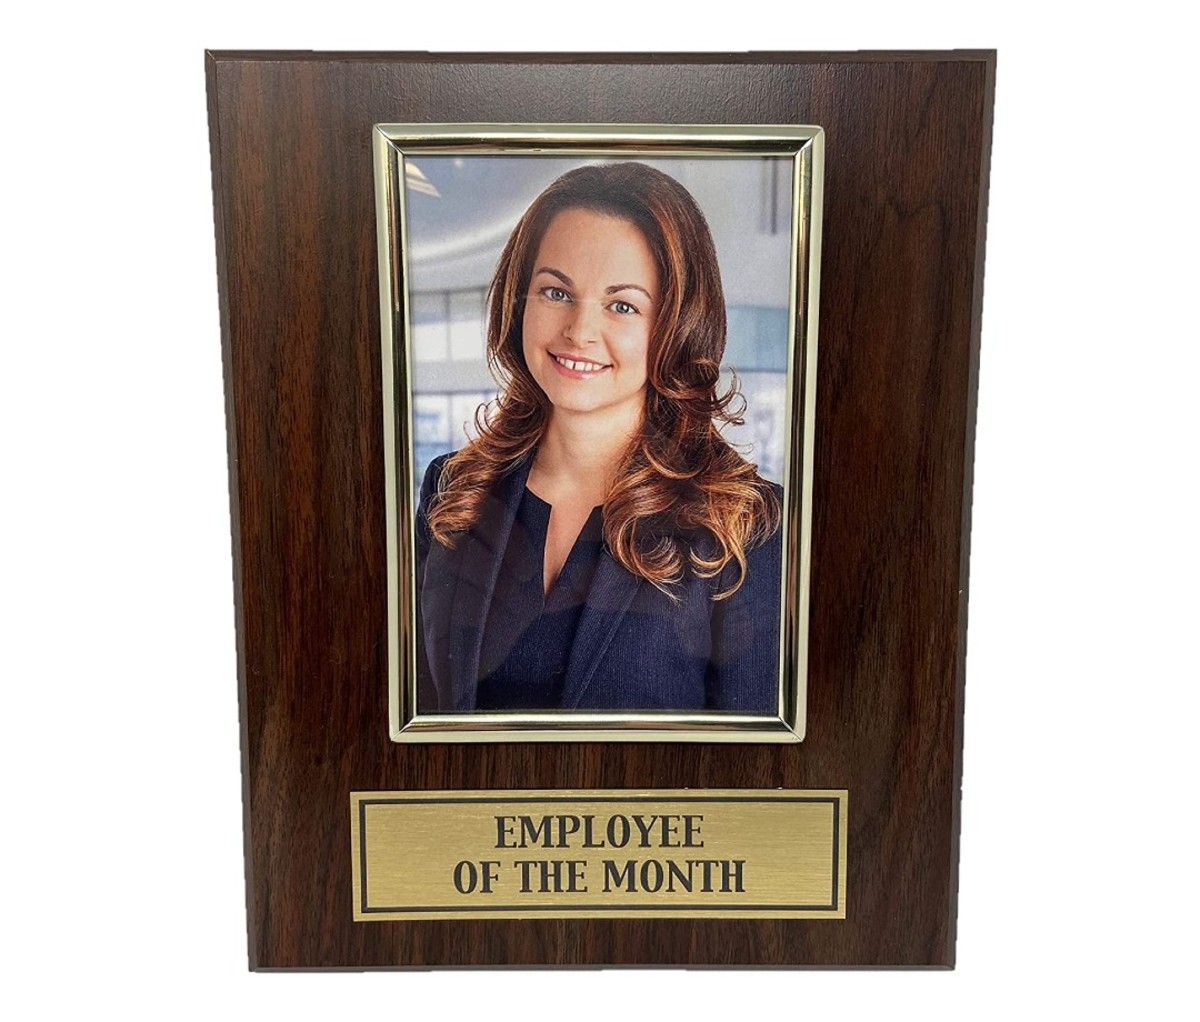 Employee of the Month plaque 